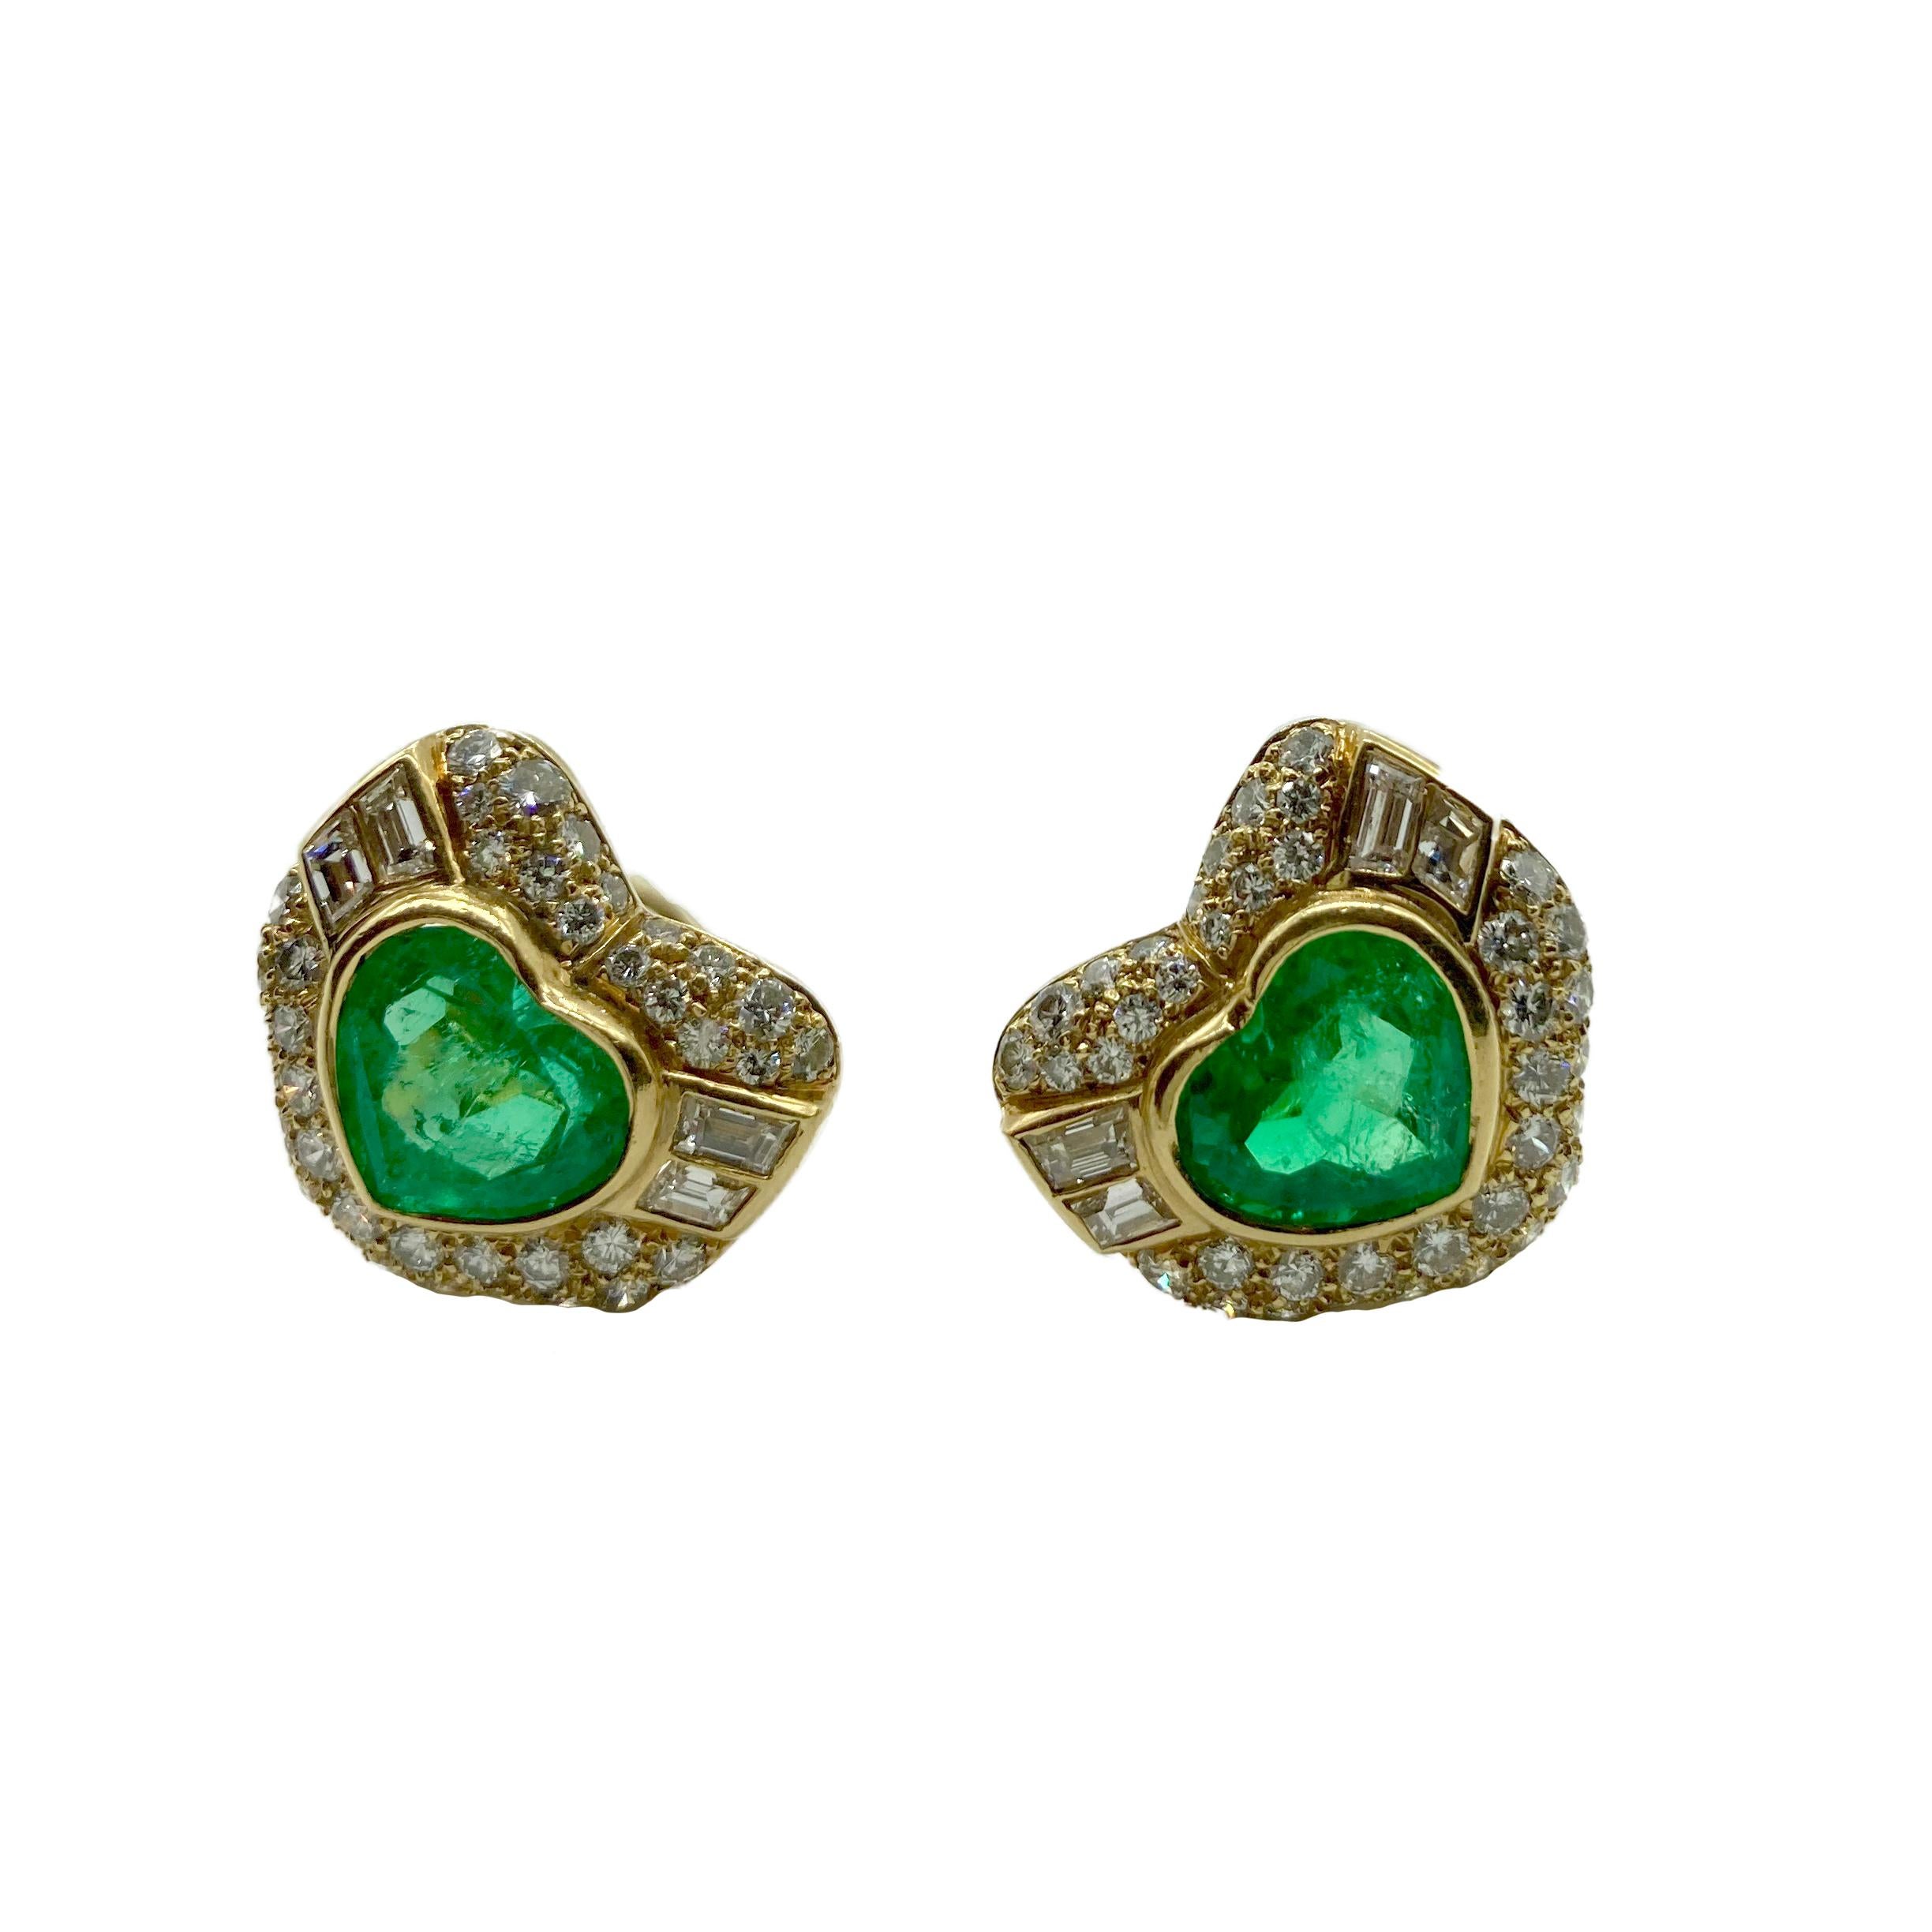 A stunning pair of Bulgari earrings in 18 karat yellow gold with two heart-shaped emeralds, app. 2.4 cts each, and 4.5 carats of diamonds. Made in Italy, circa 1975.